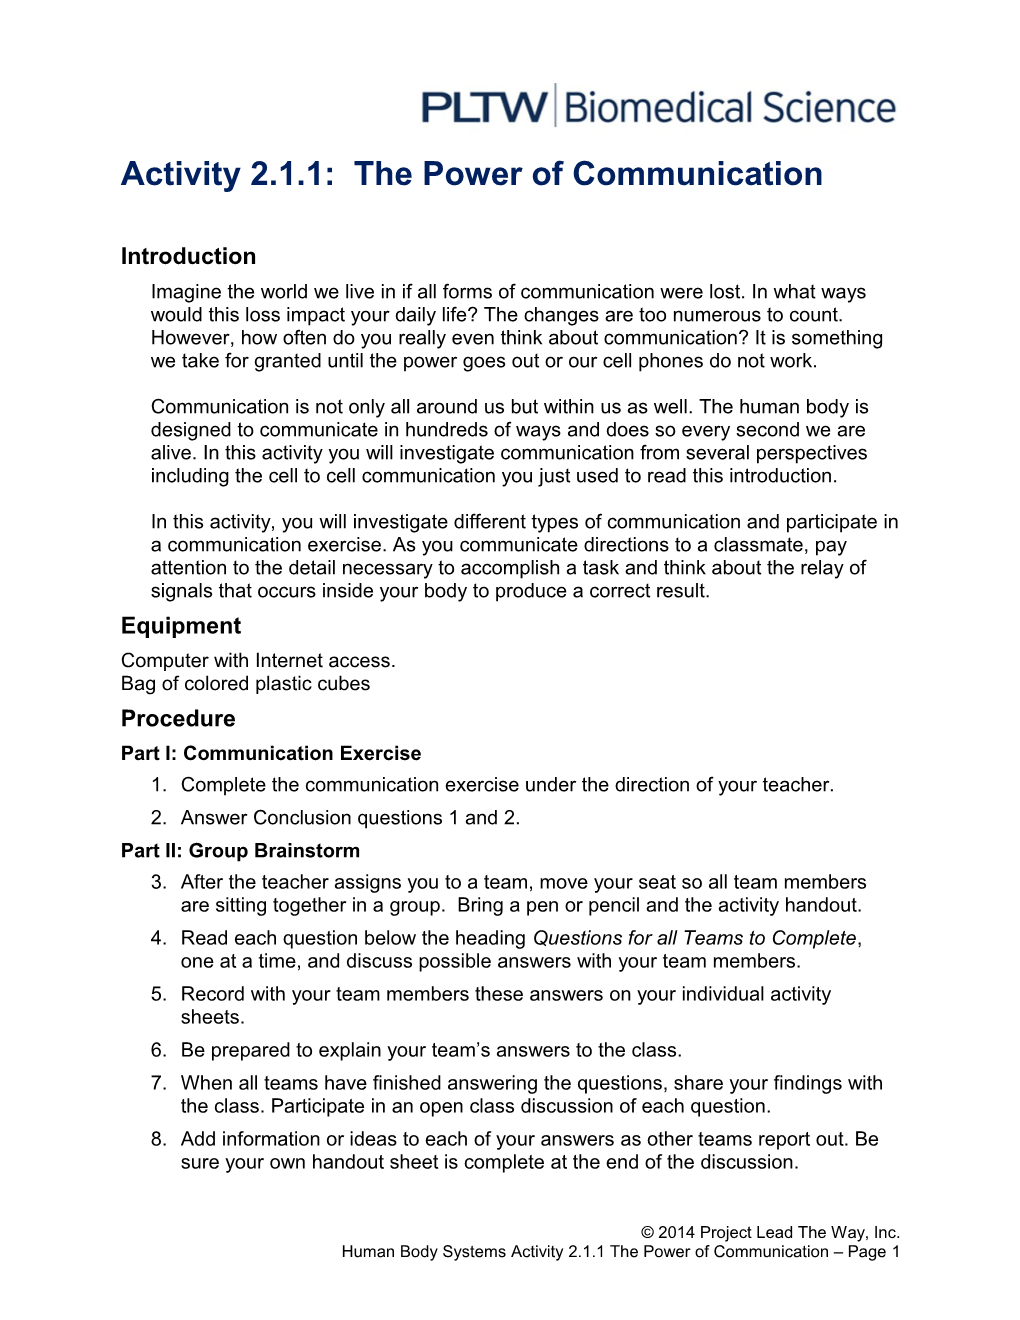 Activity 2.1.1: the Power of Communication